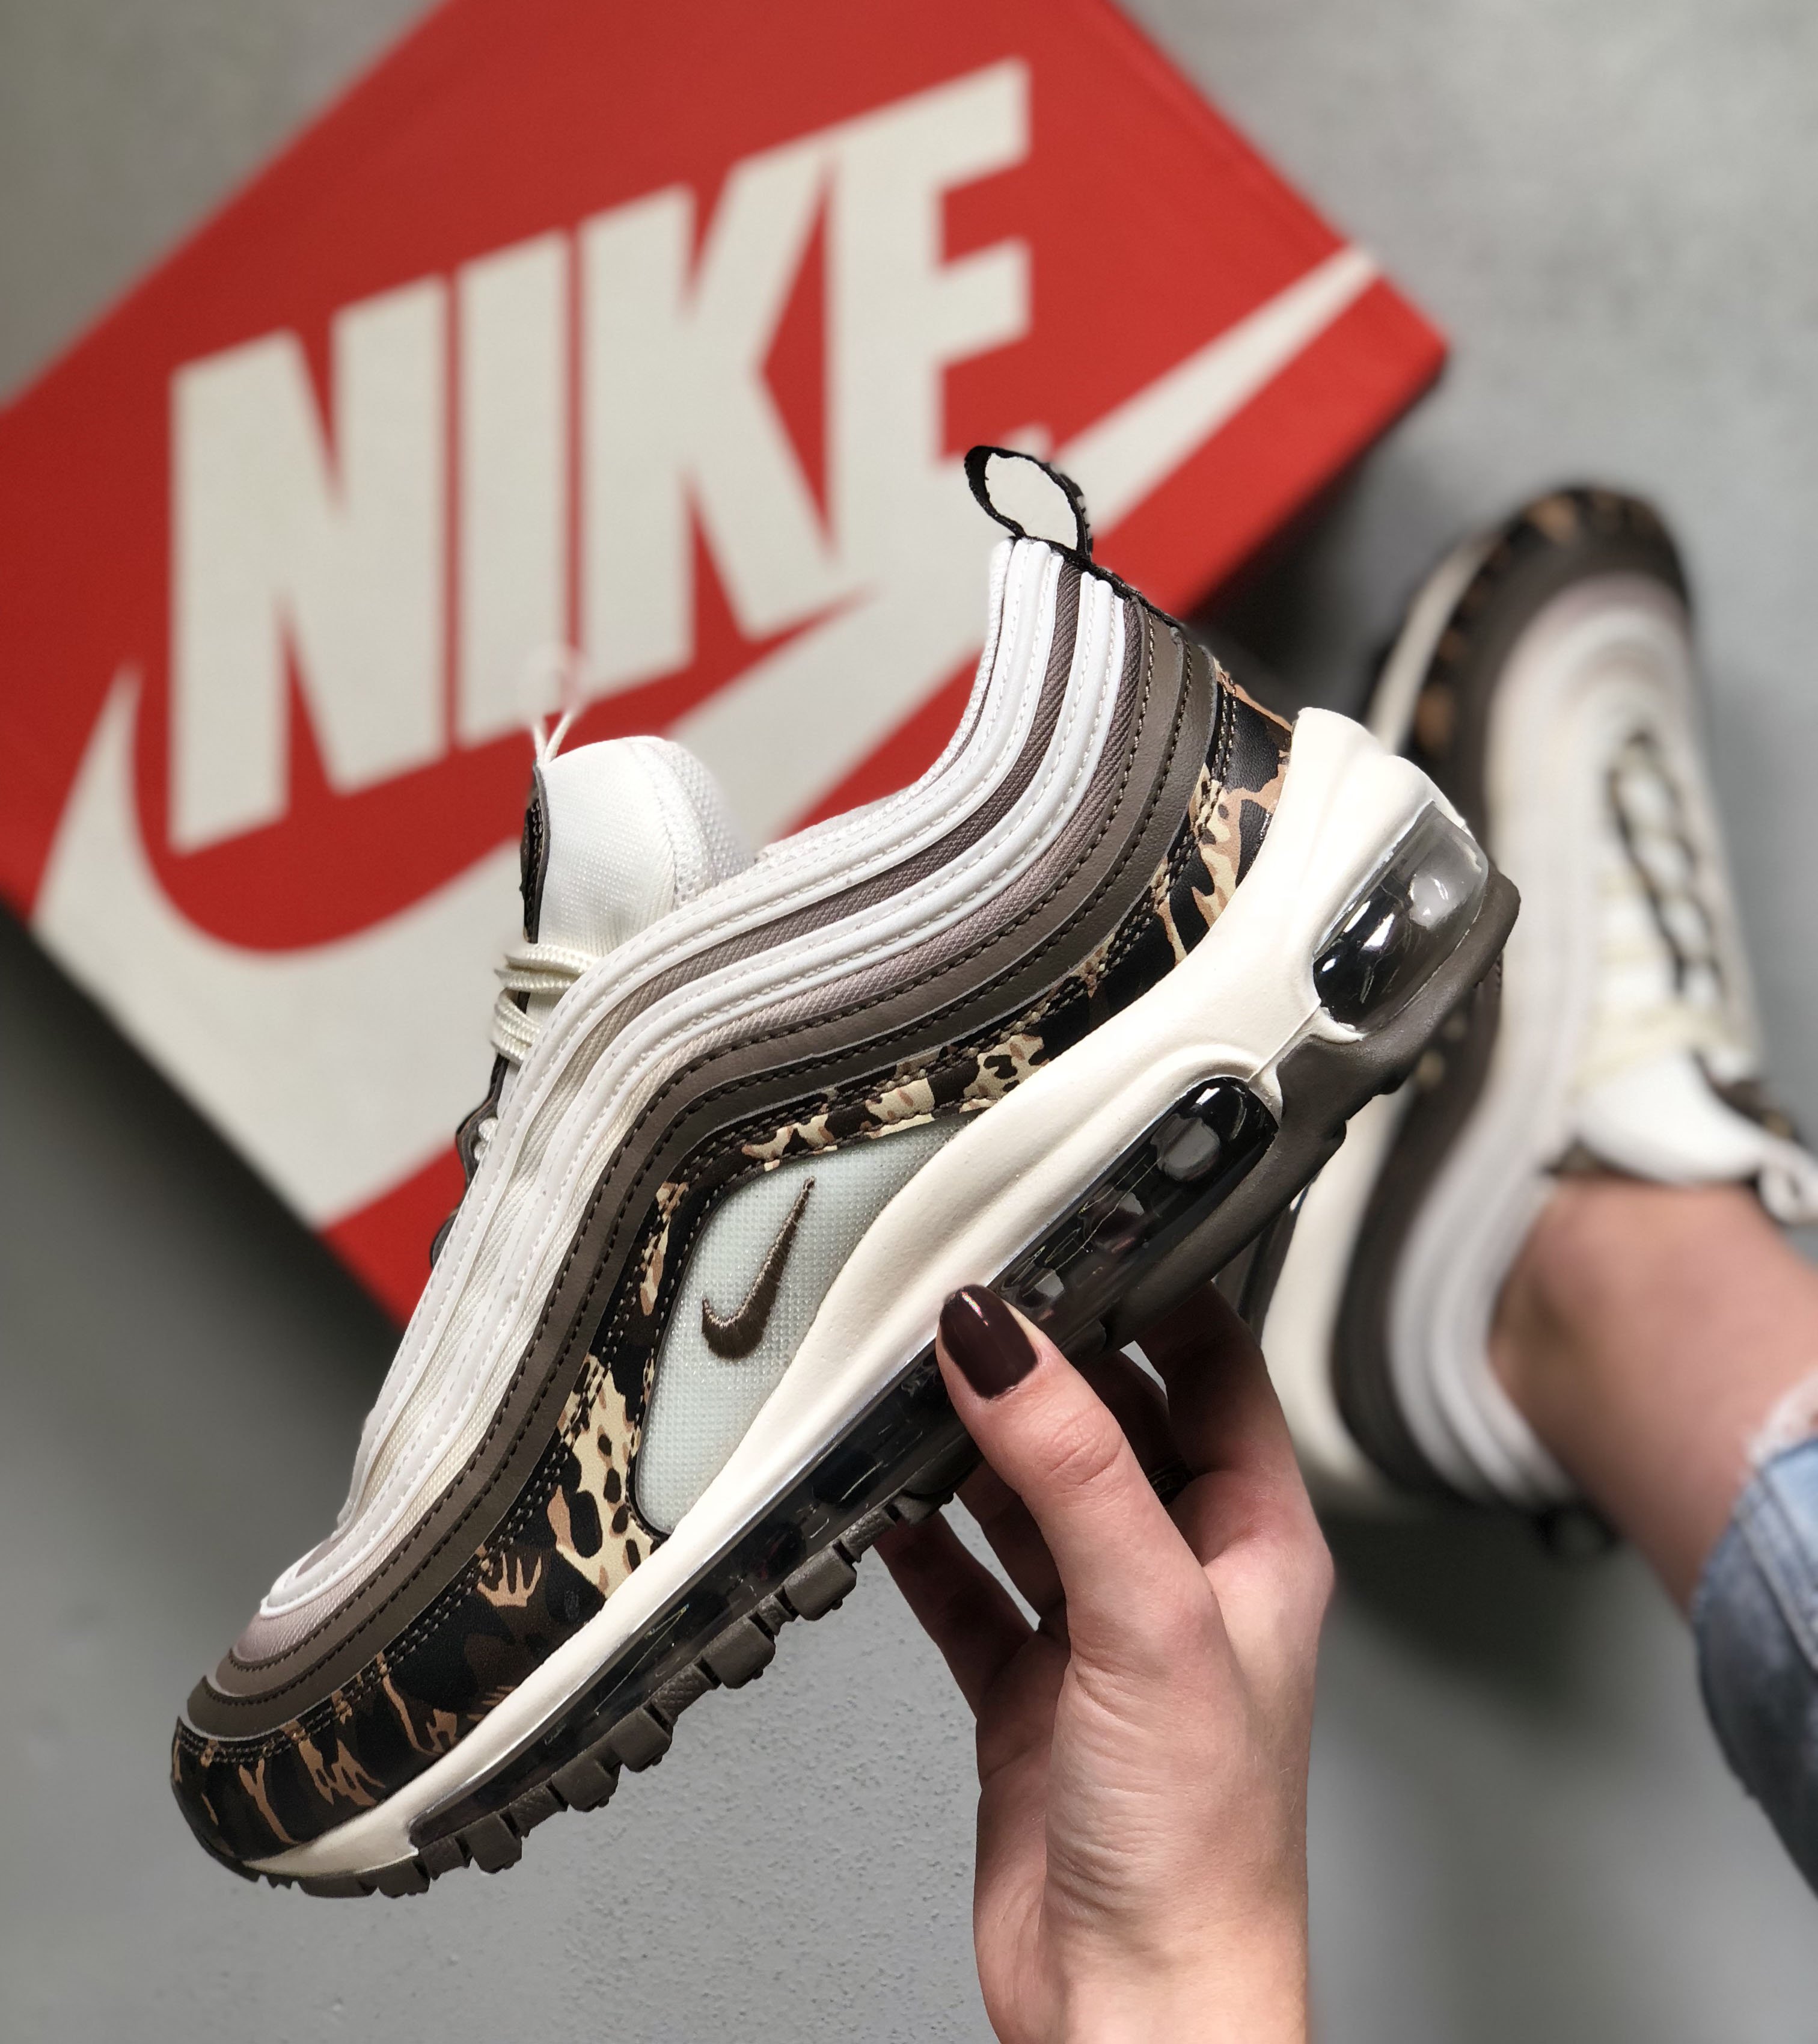 The Sole Womens on Twitter: "An Exclusive Closer Look At Nike's Air Max 97 “Animal  Pack” https://t.co/fRxylVPoOe https://t.co/CiNmAYk7nN" / Twitter